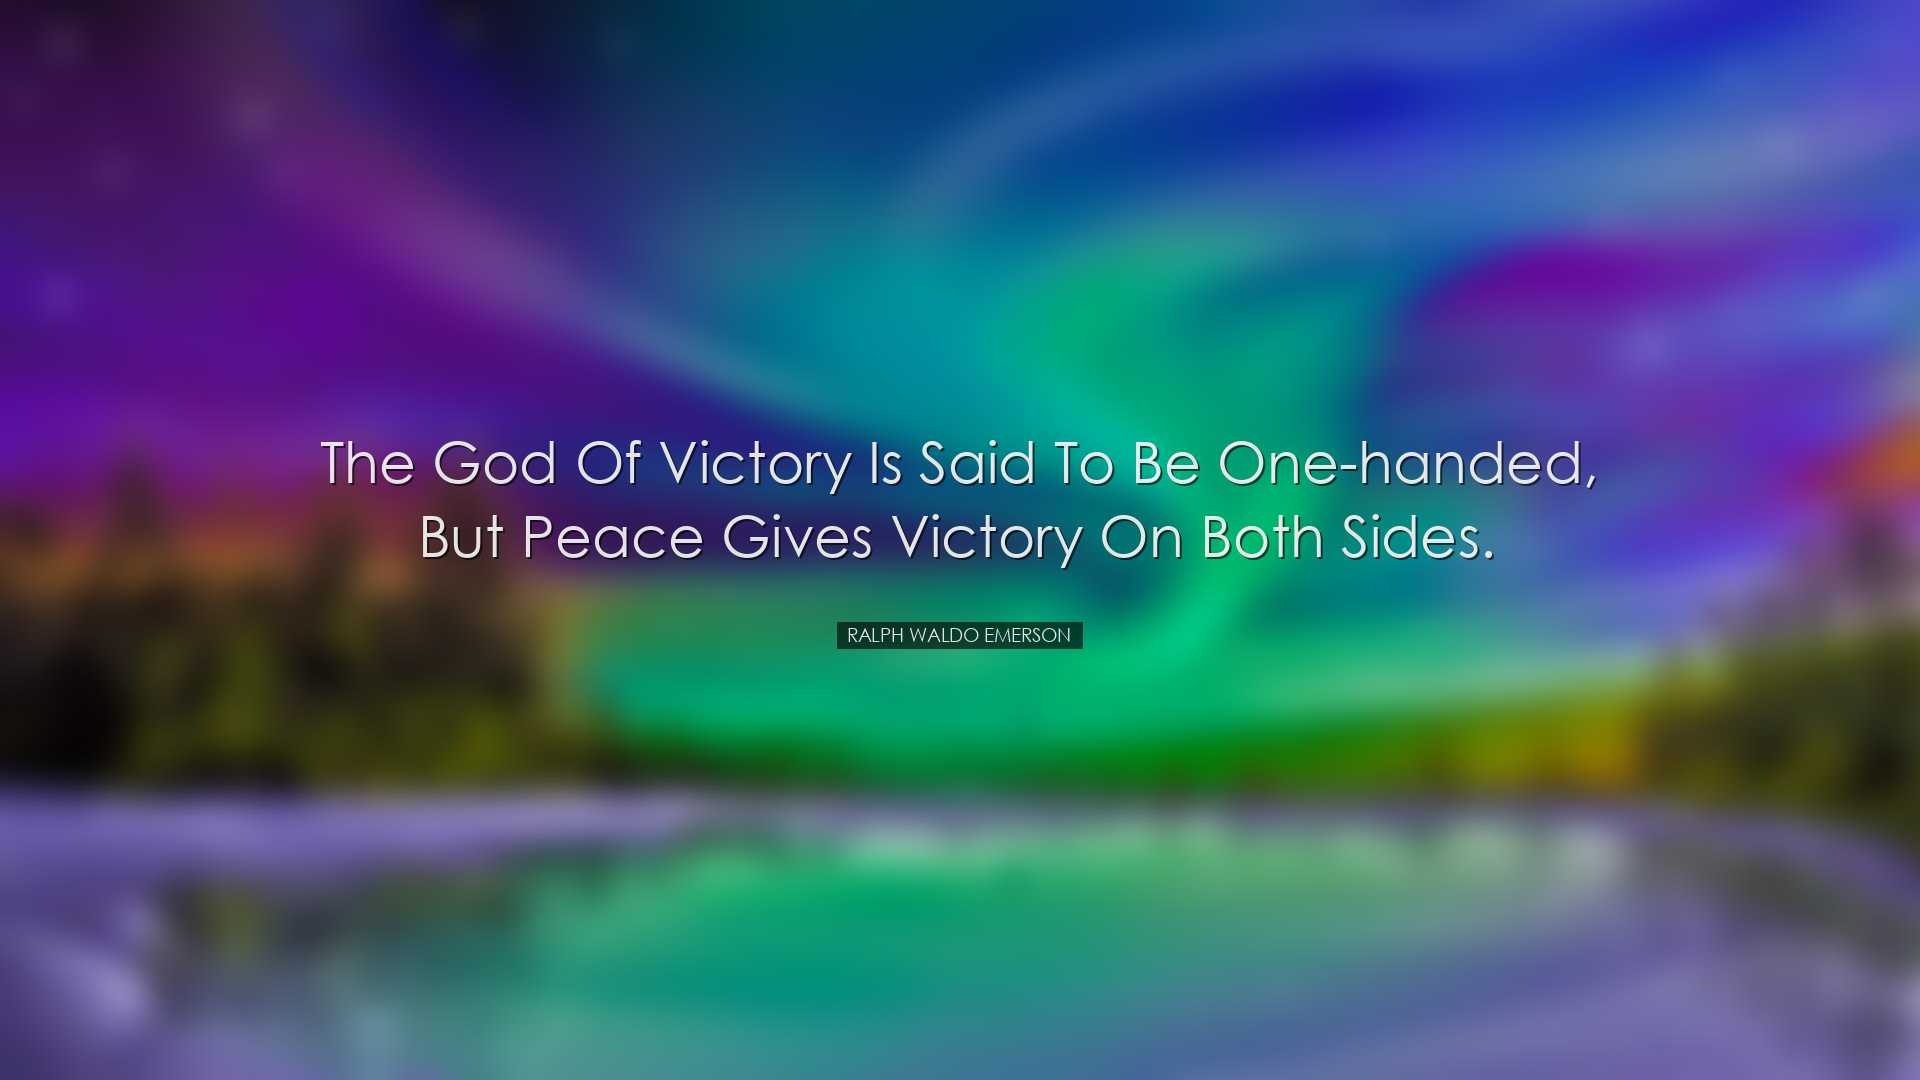 The god of victory is said to be one-handed, but peace gives victo